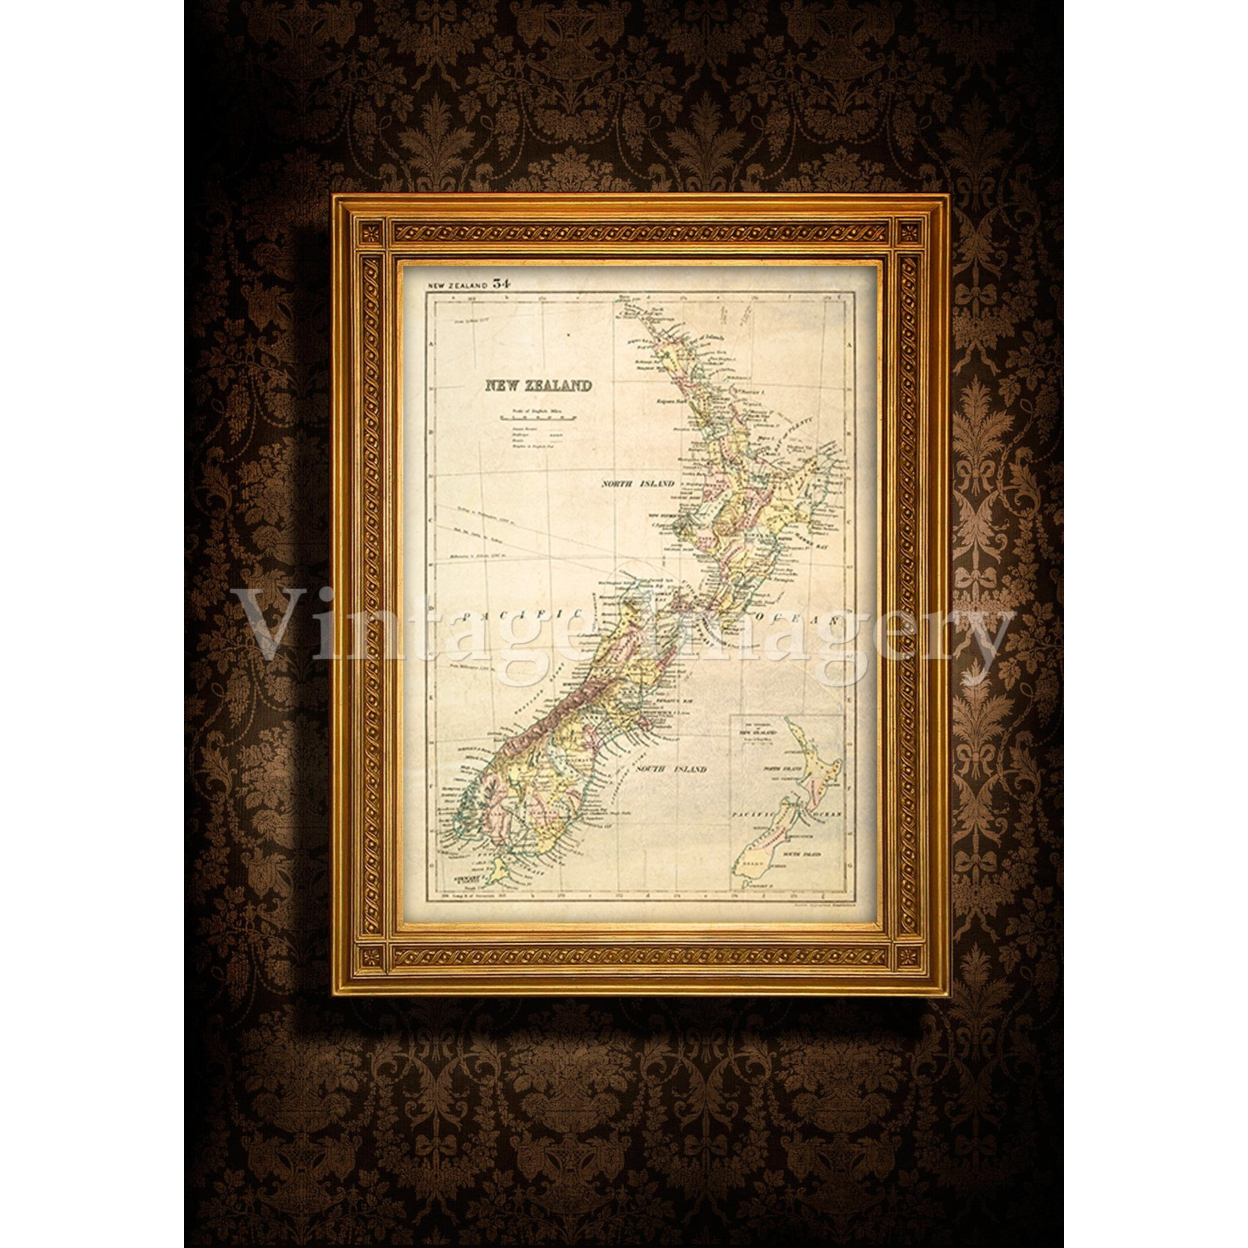 Antique New Zealand map 1881 Old map of New Zealand. Vintage New Zealand wall map home decor fine art print Historical Map map reproduction - 43" x